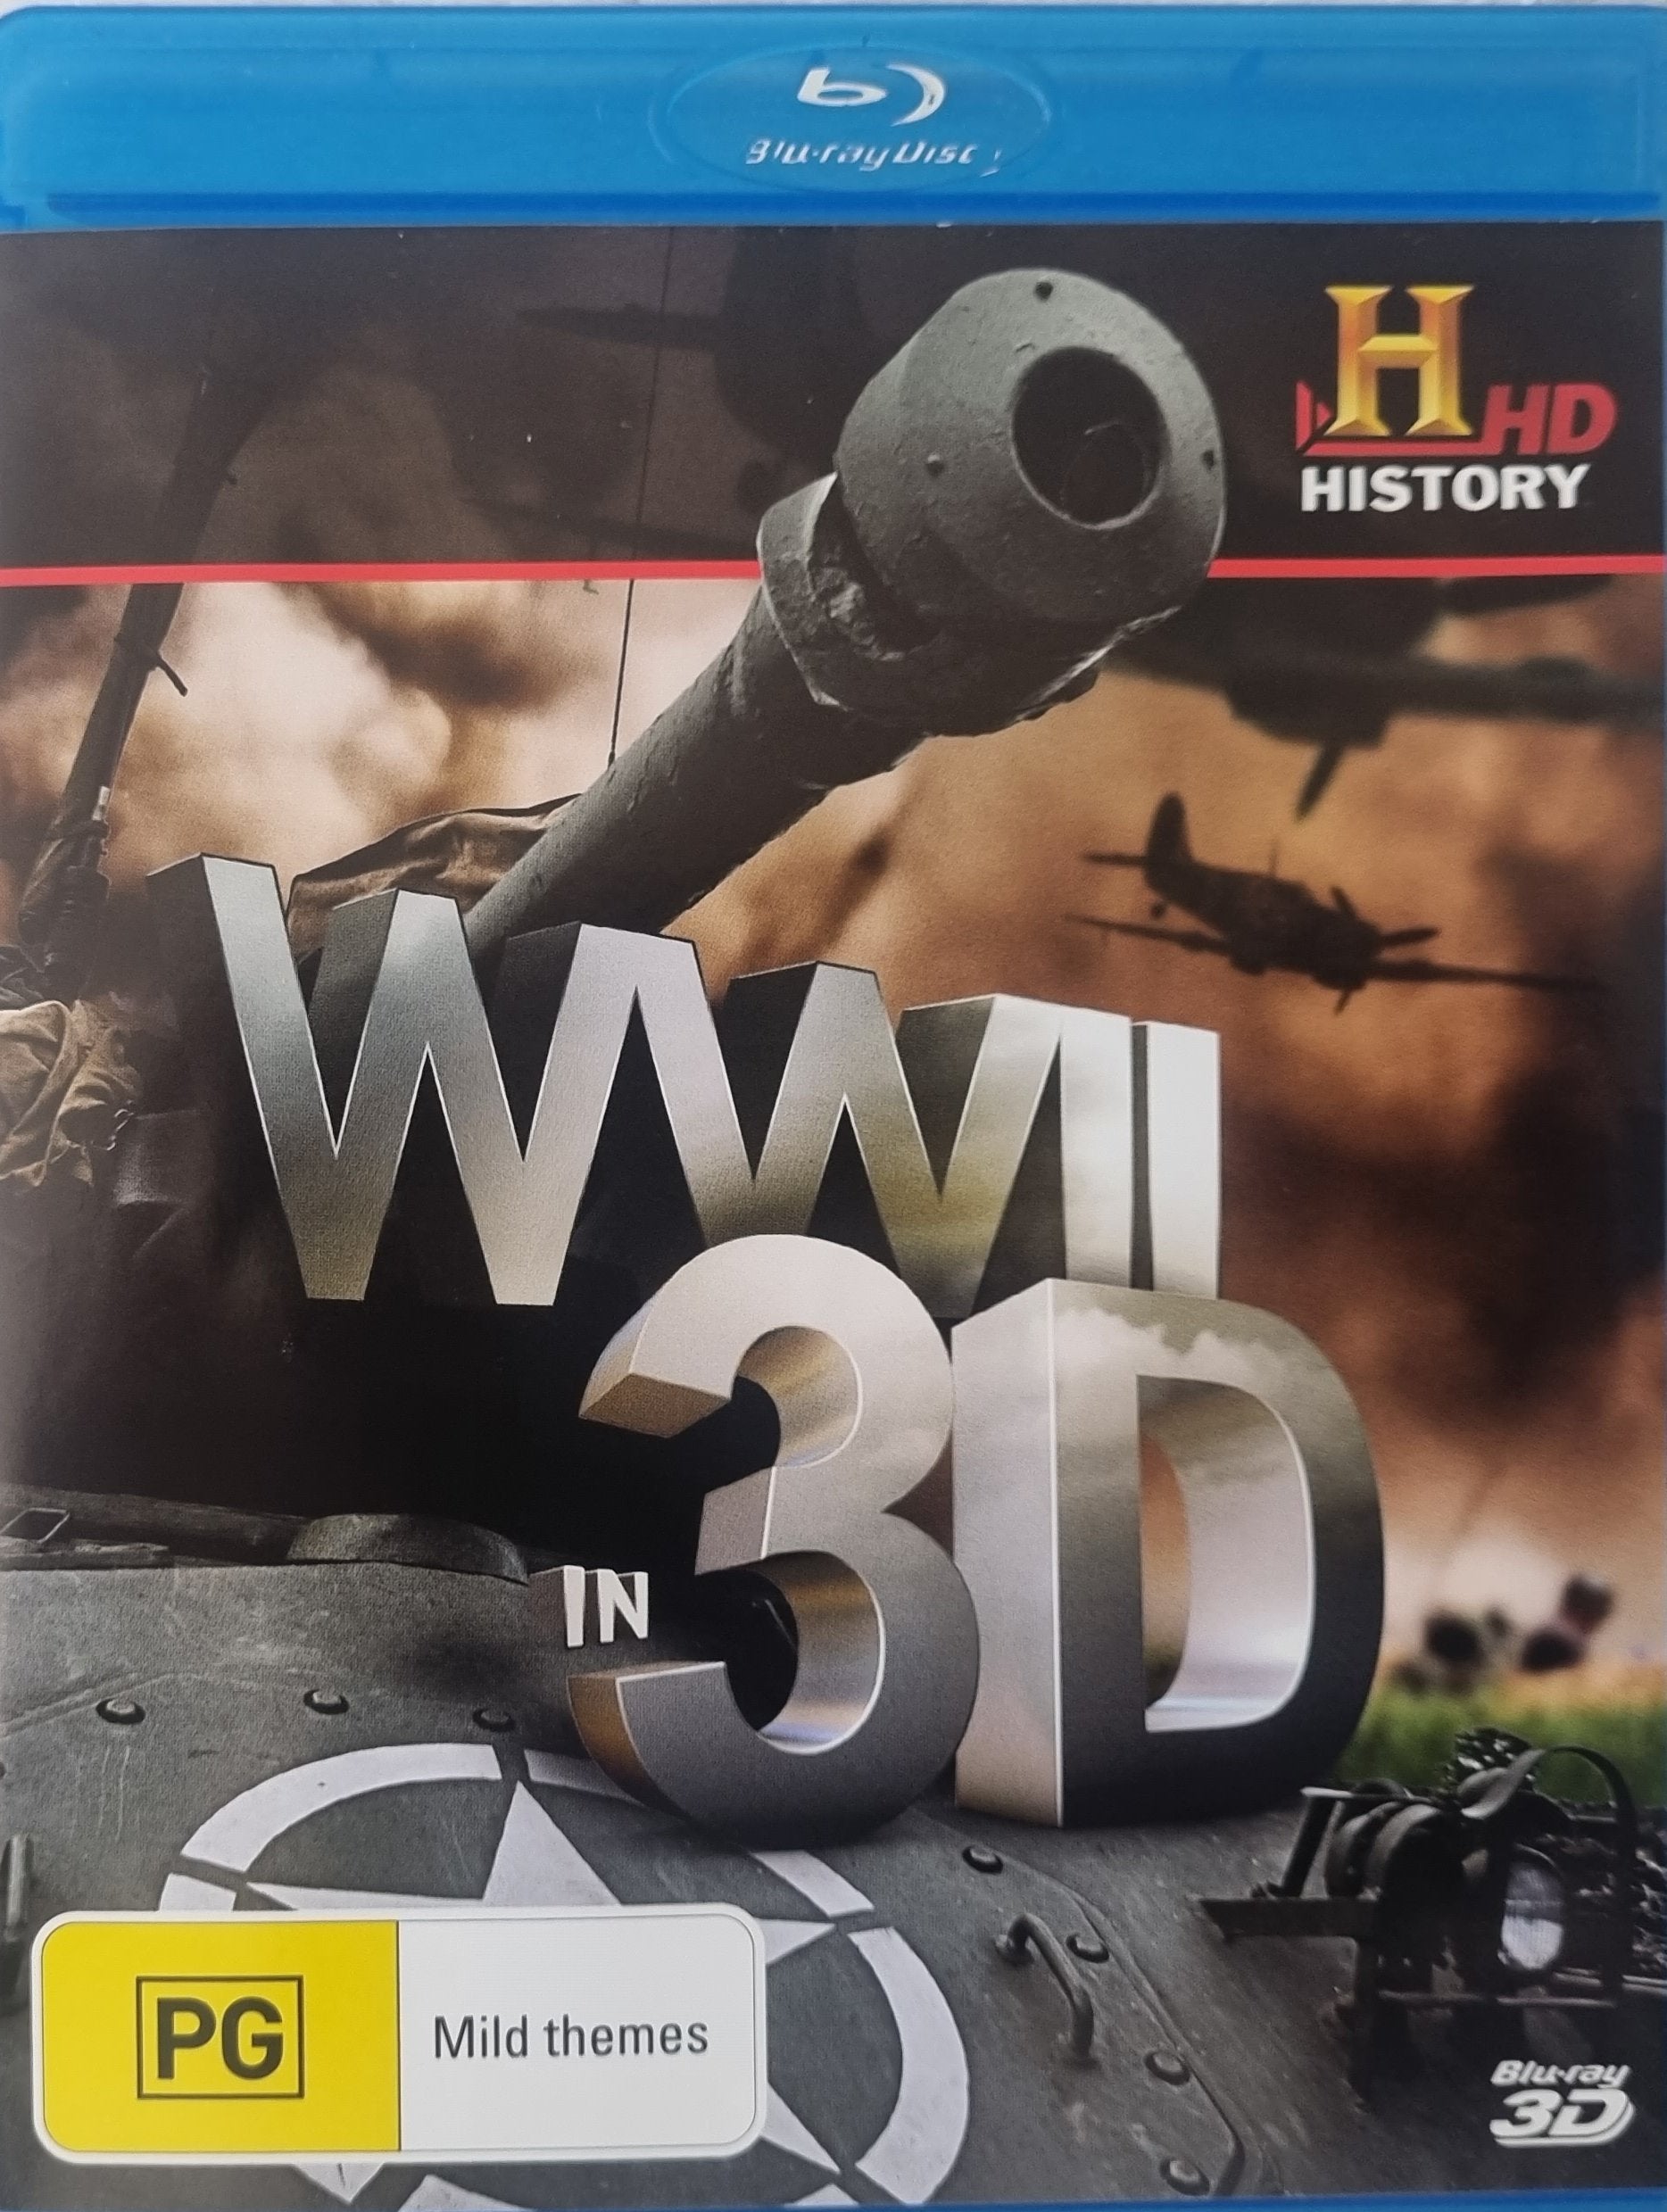 WWII in 3D (Blu Ray)